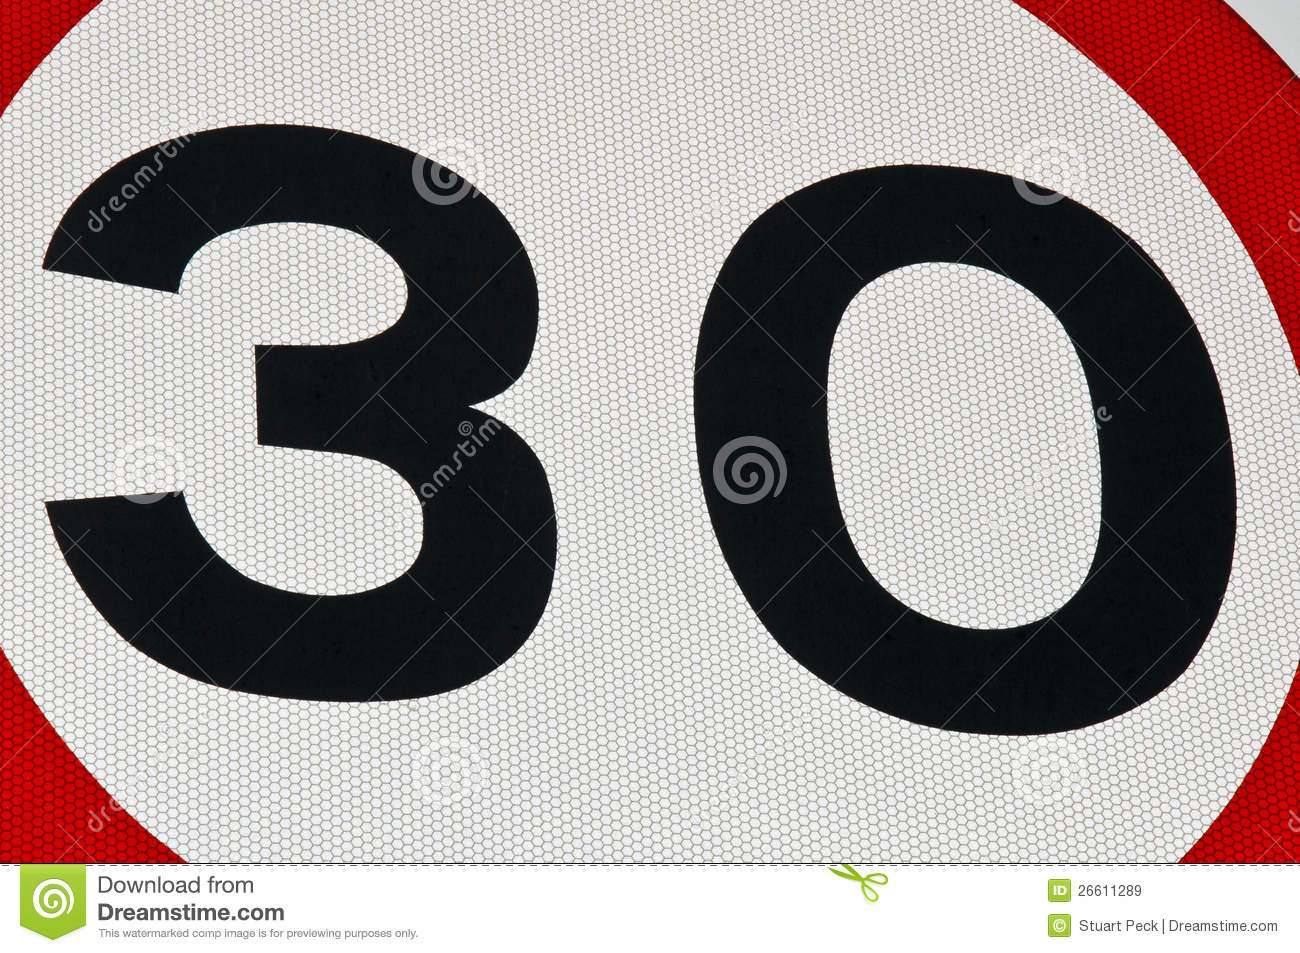 30 Miles An Hour Speed Limit Sign Royalty Free Stock Images   Image